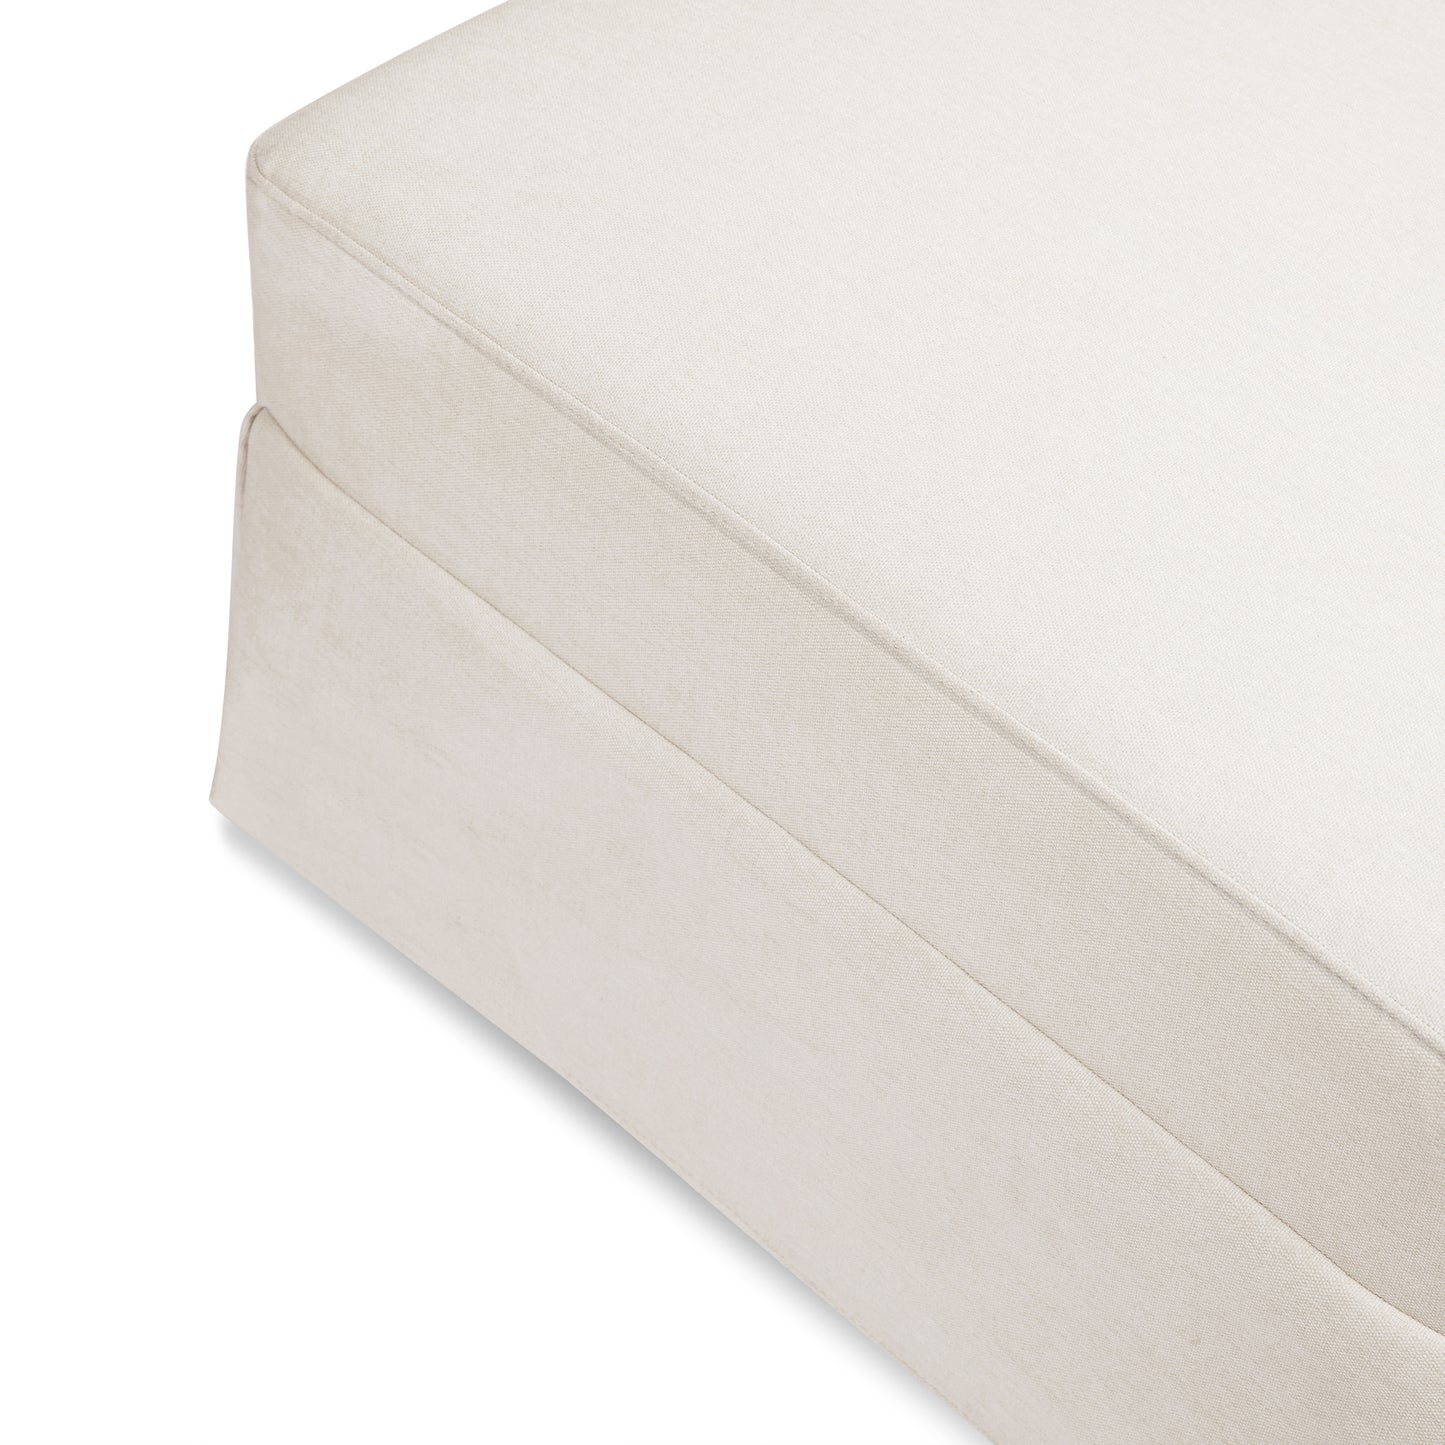 M21785PCMEW,Crawford Gliding Ottoman in Performance Cream Eco-Weave